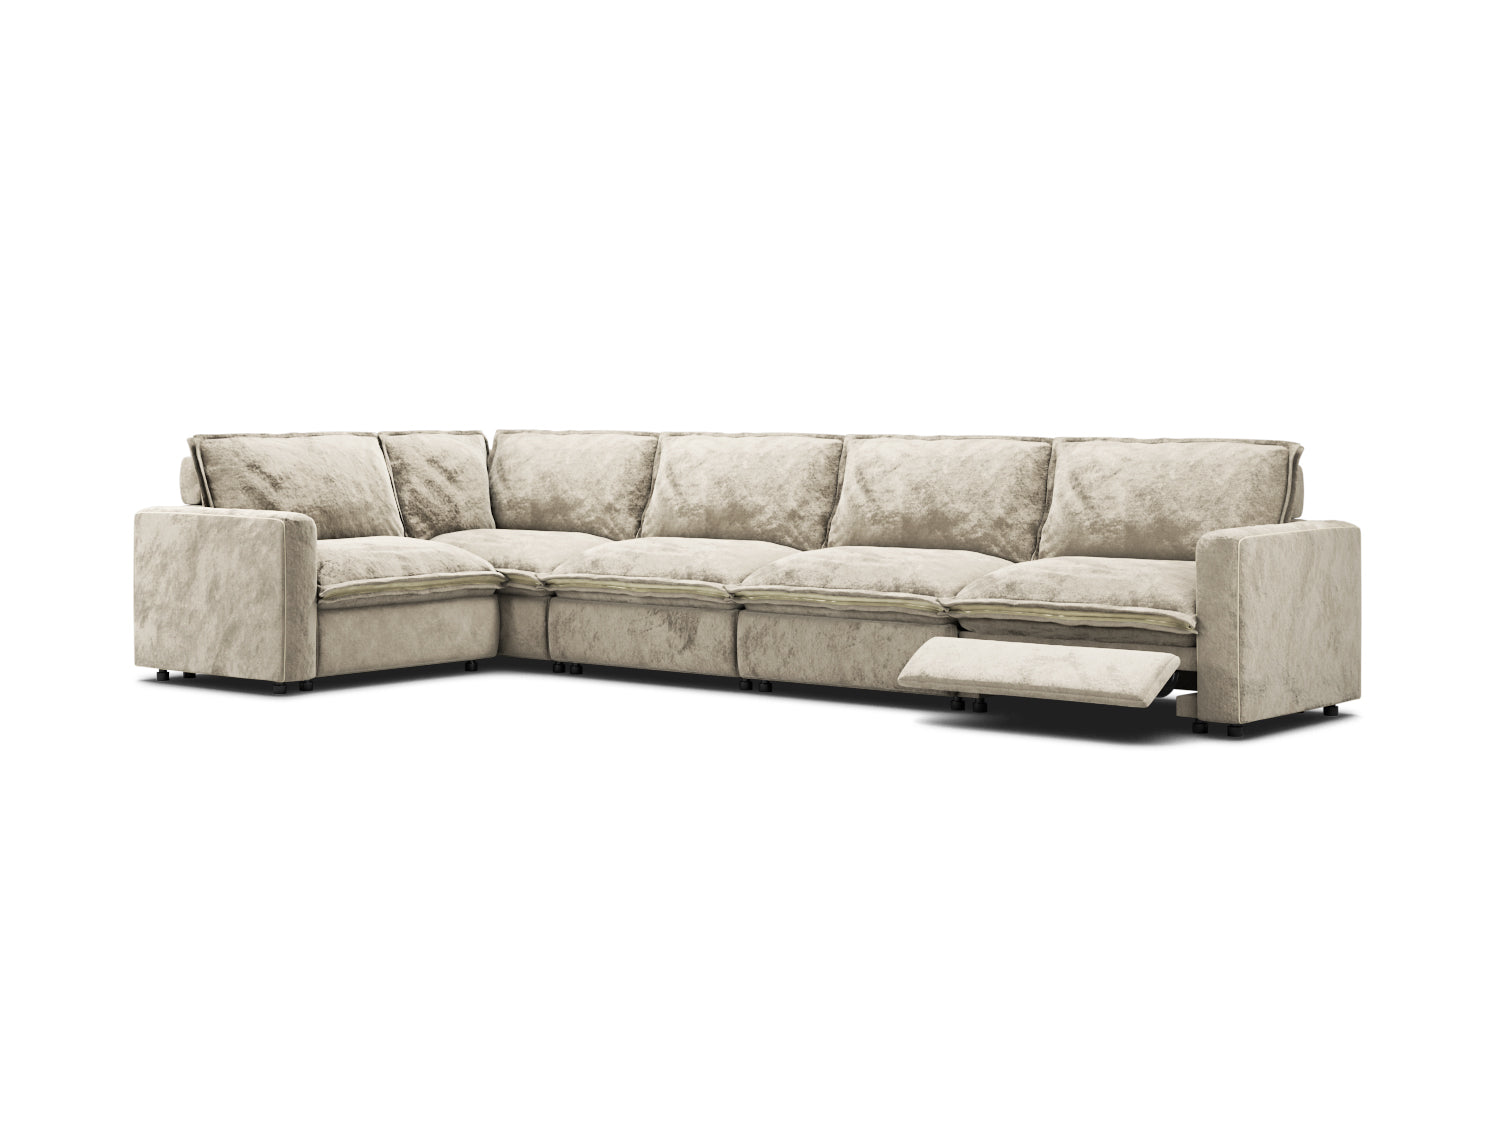 L-shaped recliner couch with 5 seats and 2 recliners in beige velvet, modular